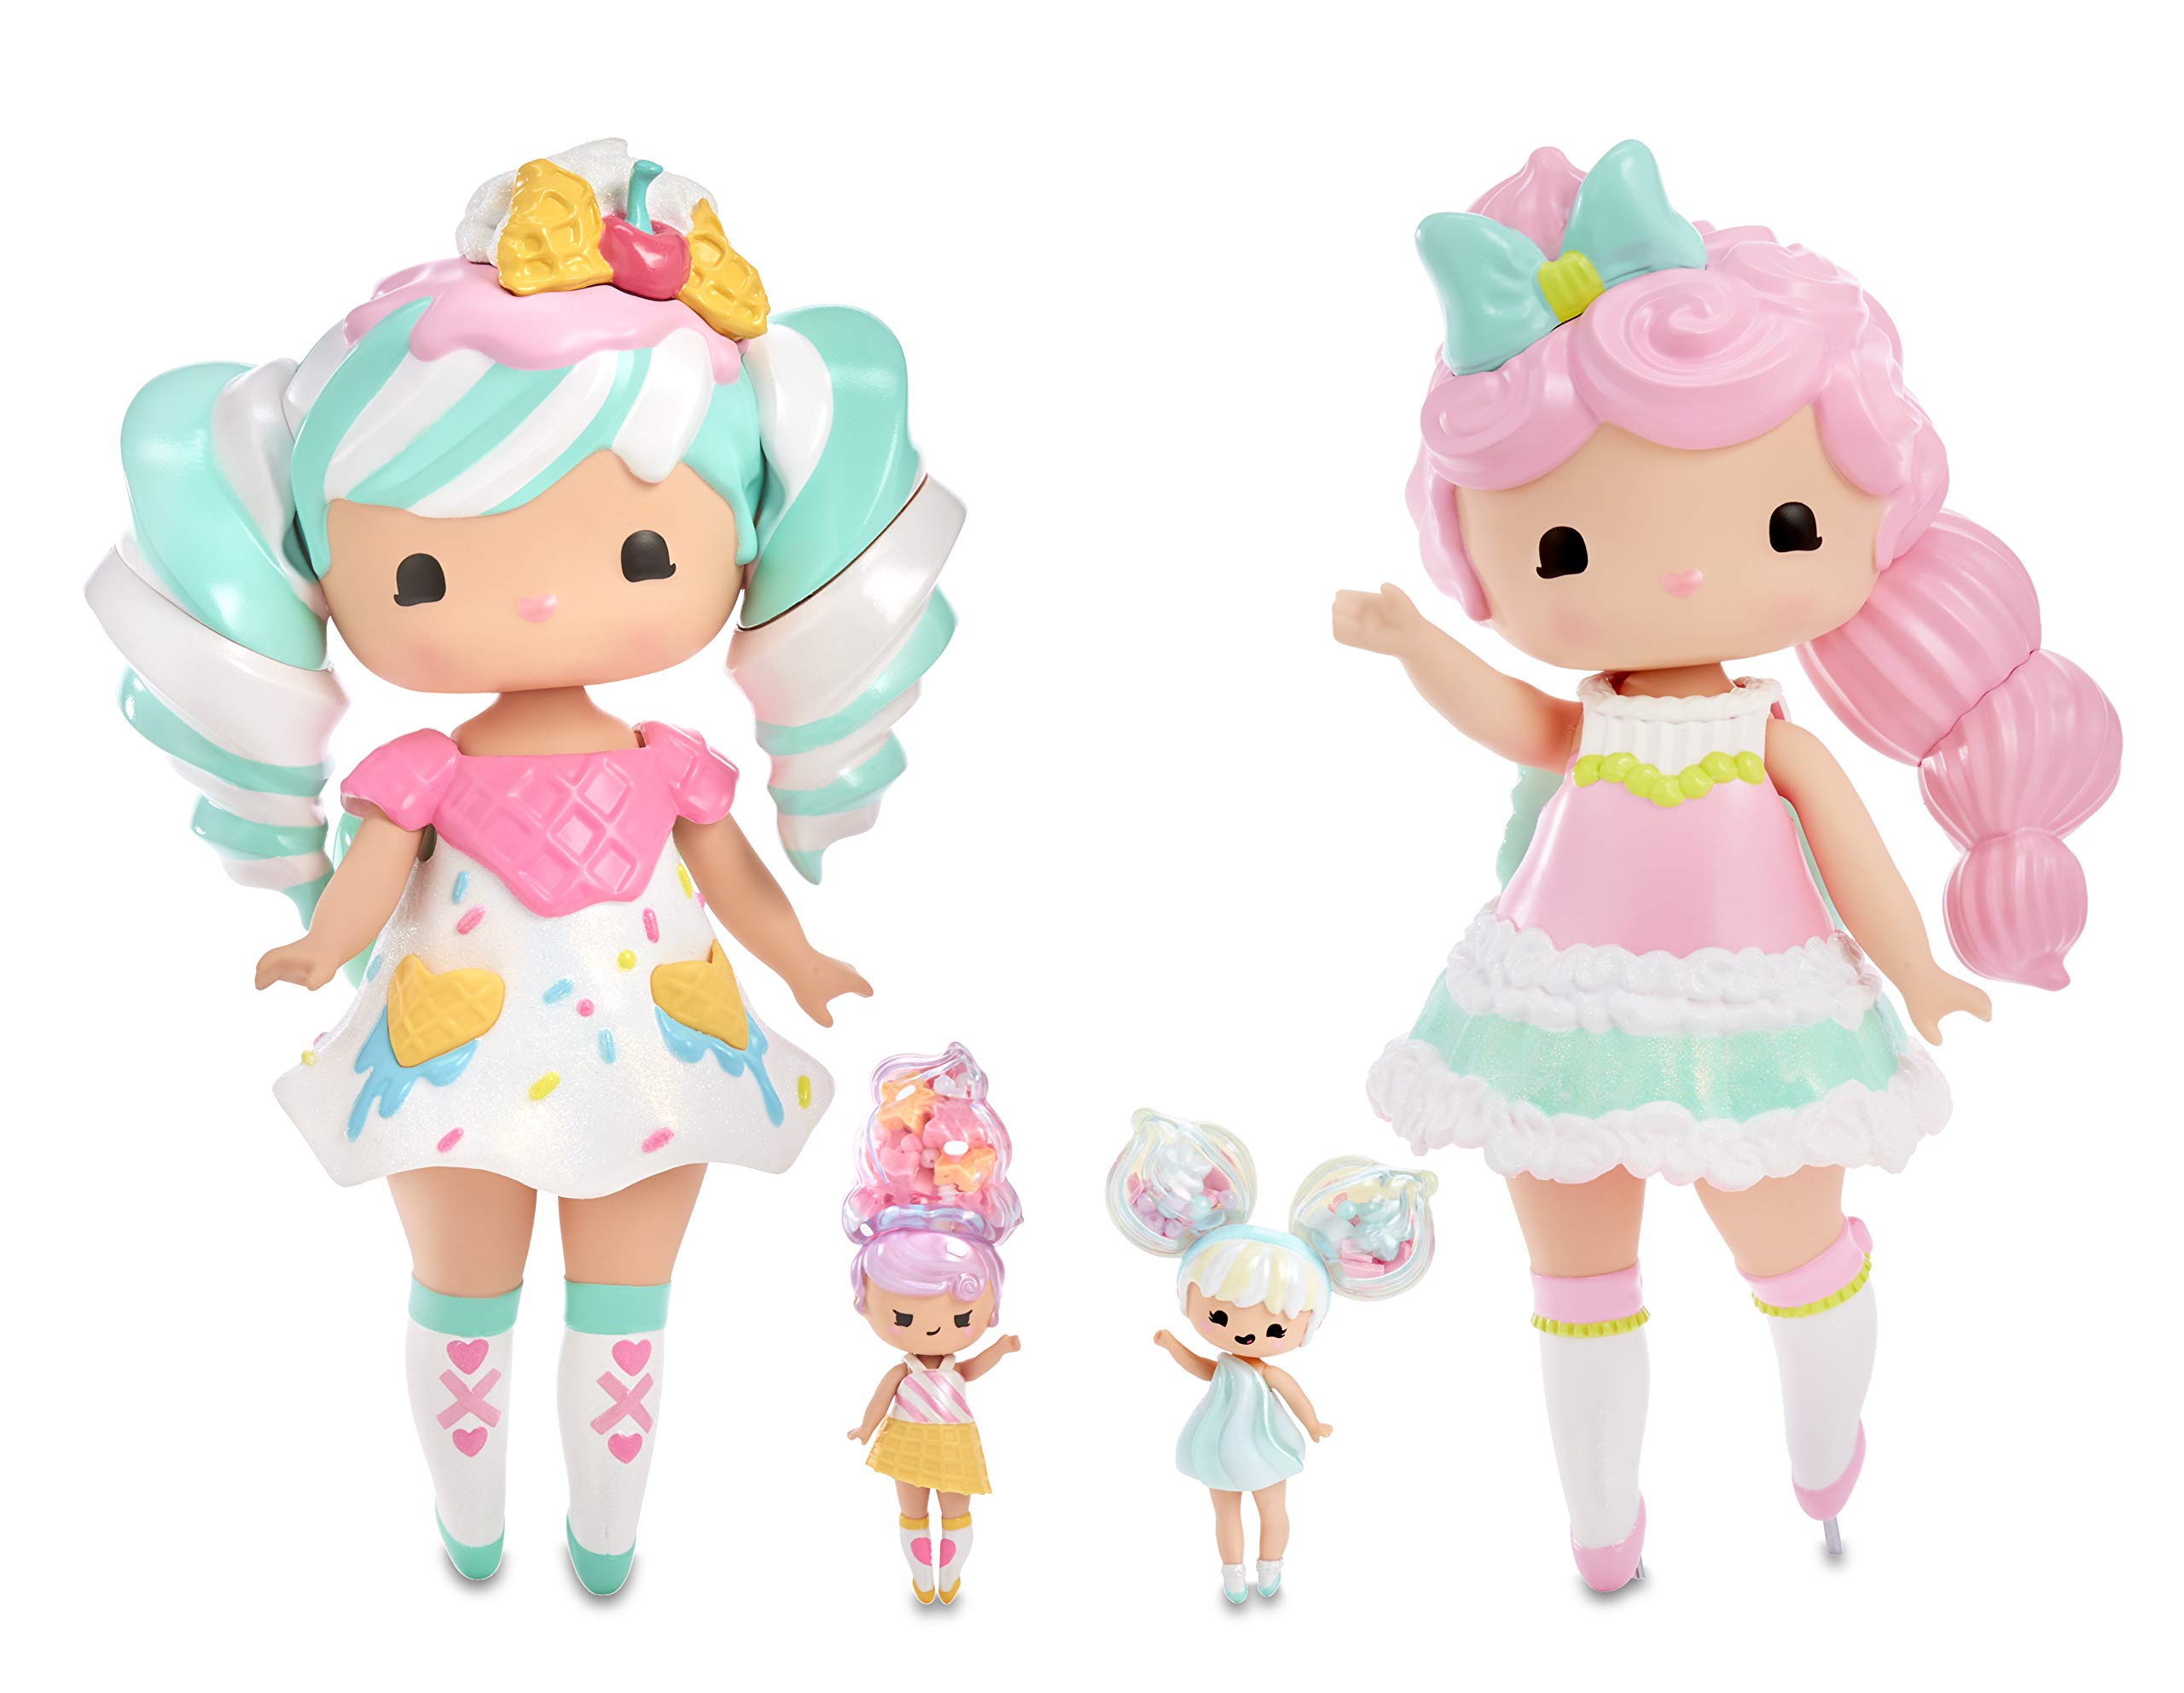 Secret Crush Surprise Large & Small Dolls - Sundae Swirl, Winnie Wafflecone Candy-Themed Hammer, Heart-Shaped Display Case for Storage & A Stand, Beads & Lanyard for DIY Jewelry - Kids Ages 3+